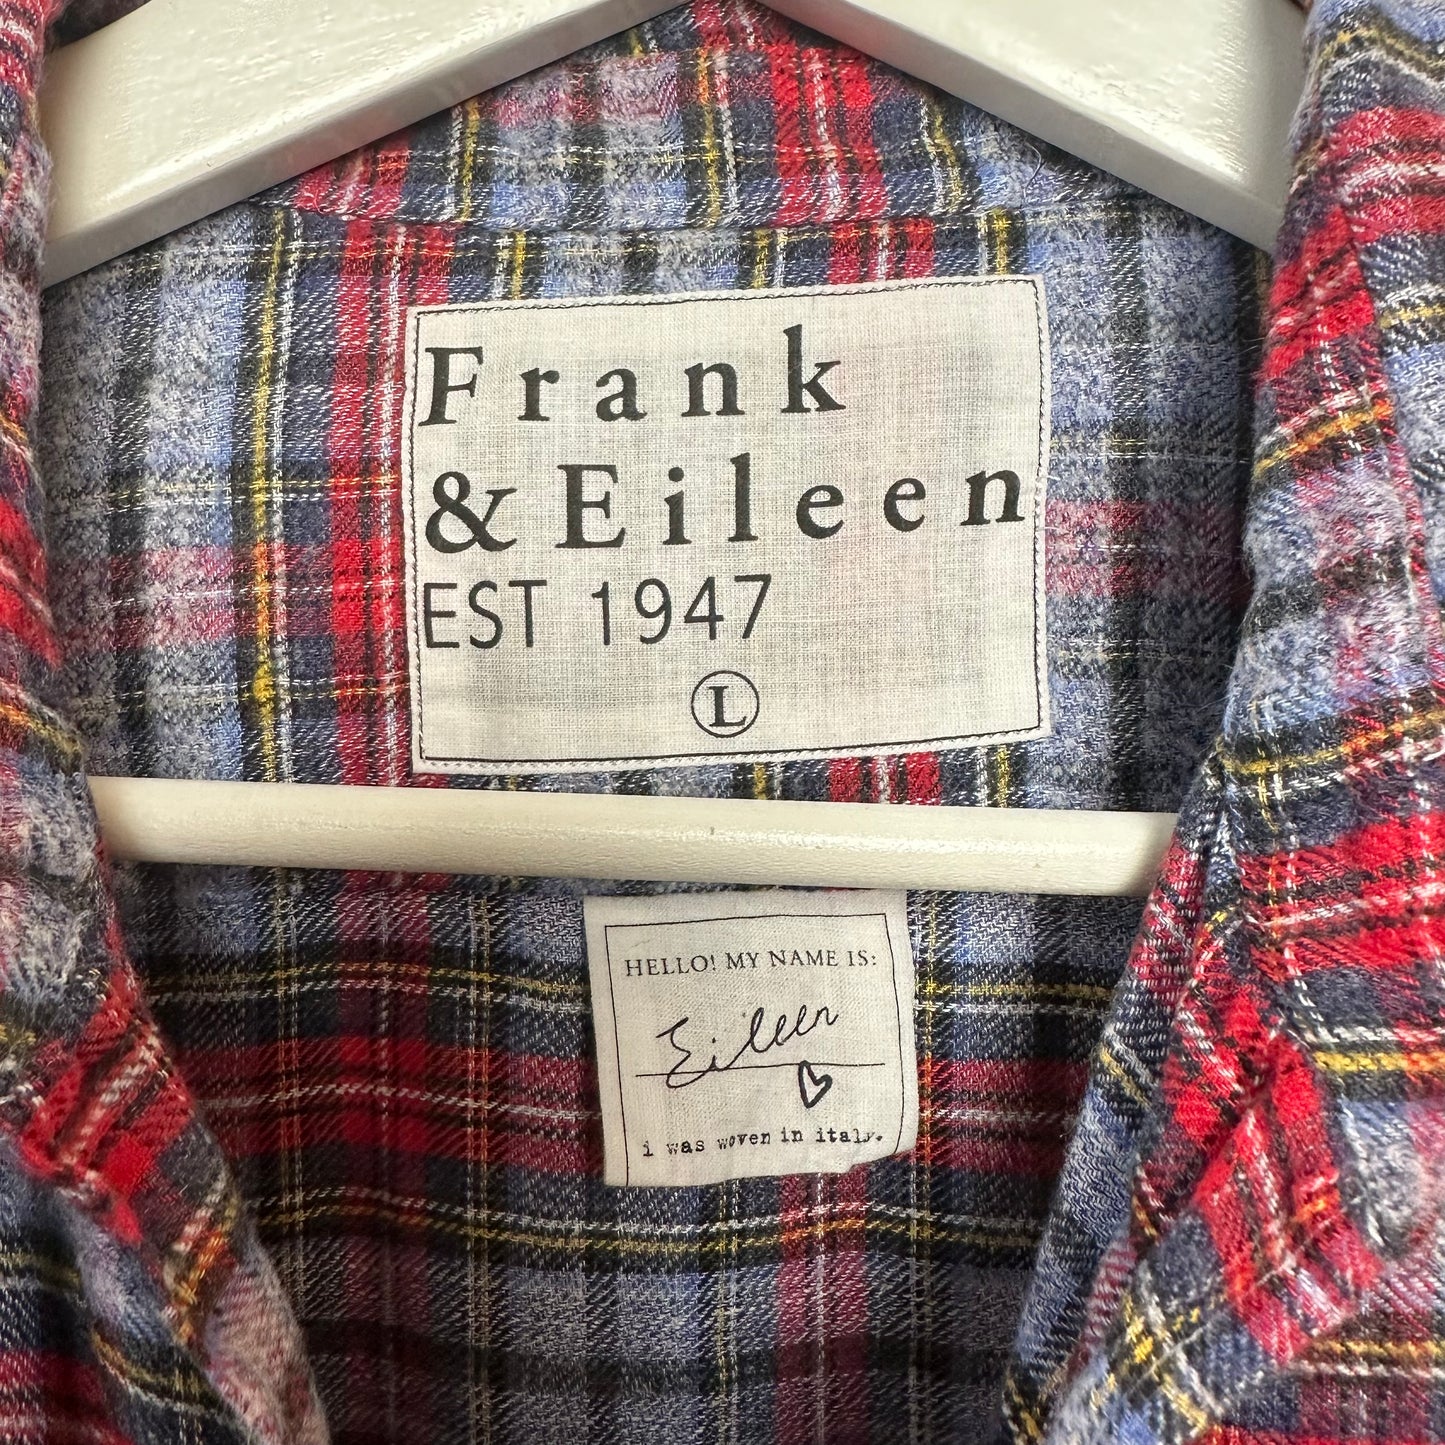 Frank & Eileen Eileen Relaxed Button Up Shirt Plaid Flannel Large